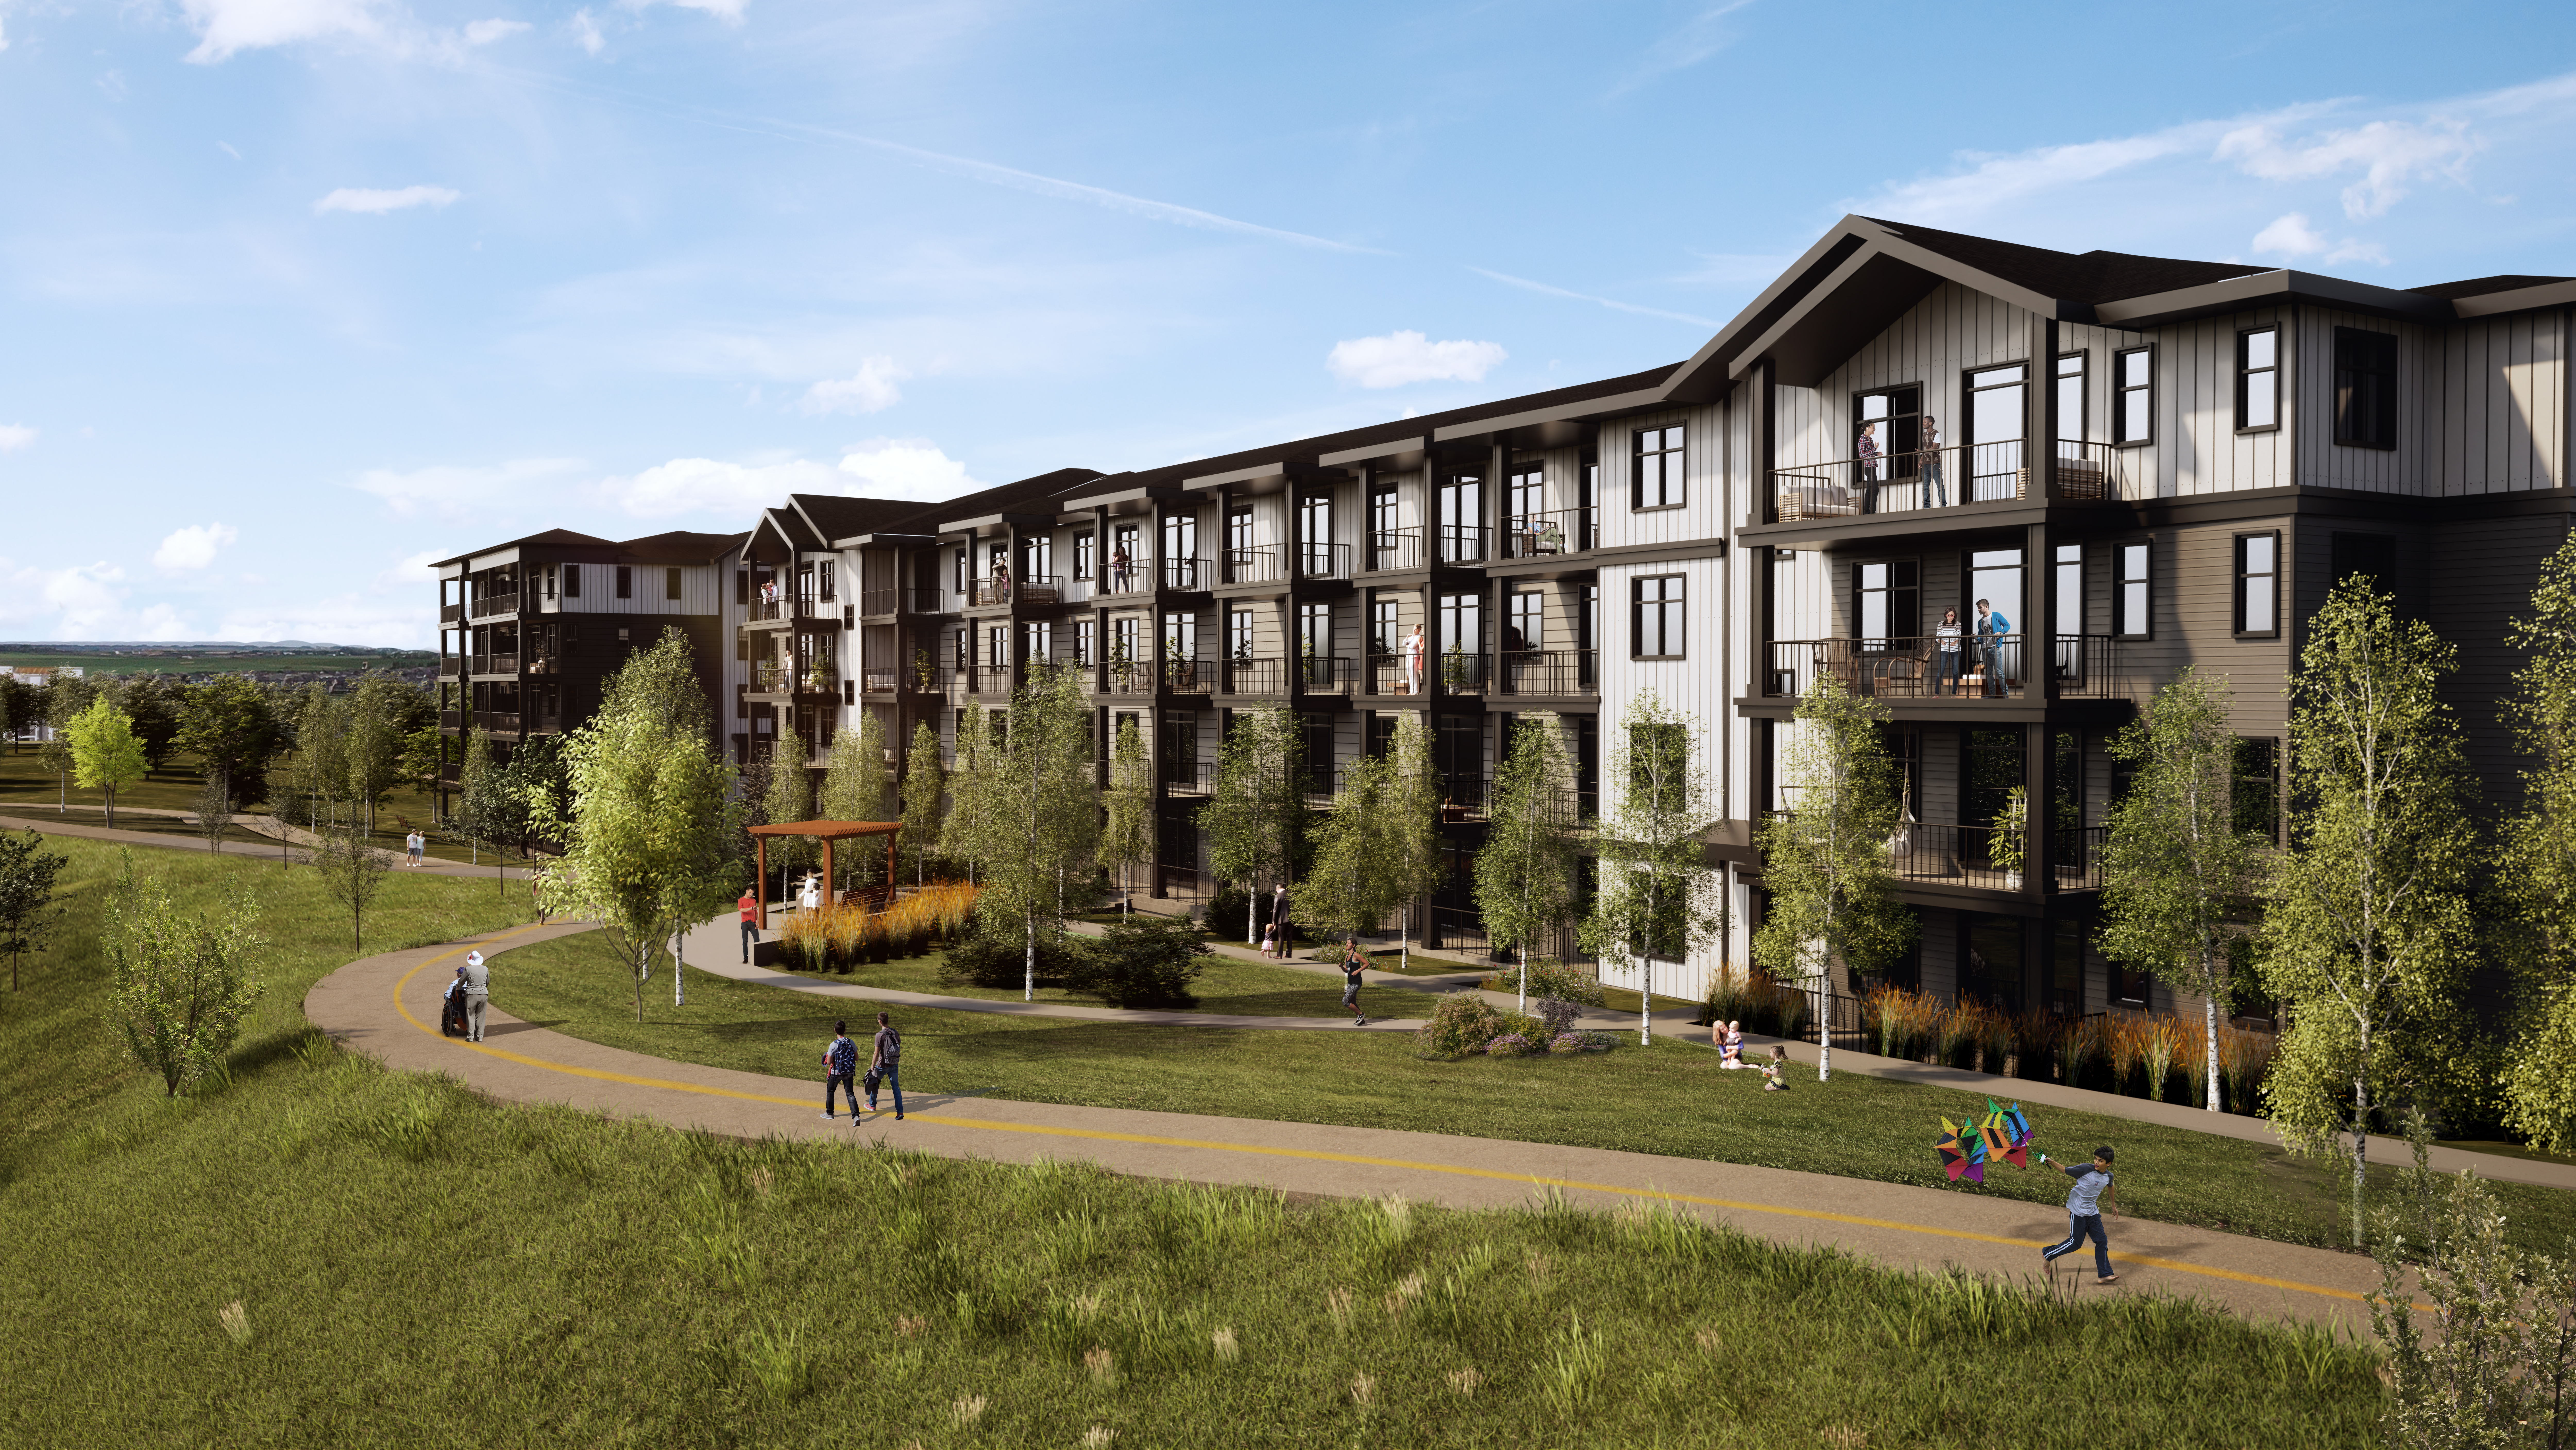 6 things to love about this new emerging community in Northwest Calgary